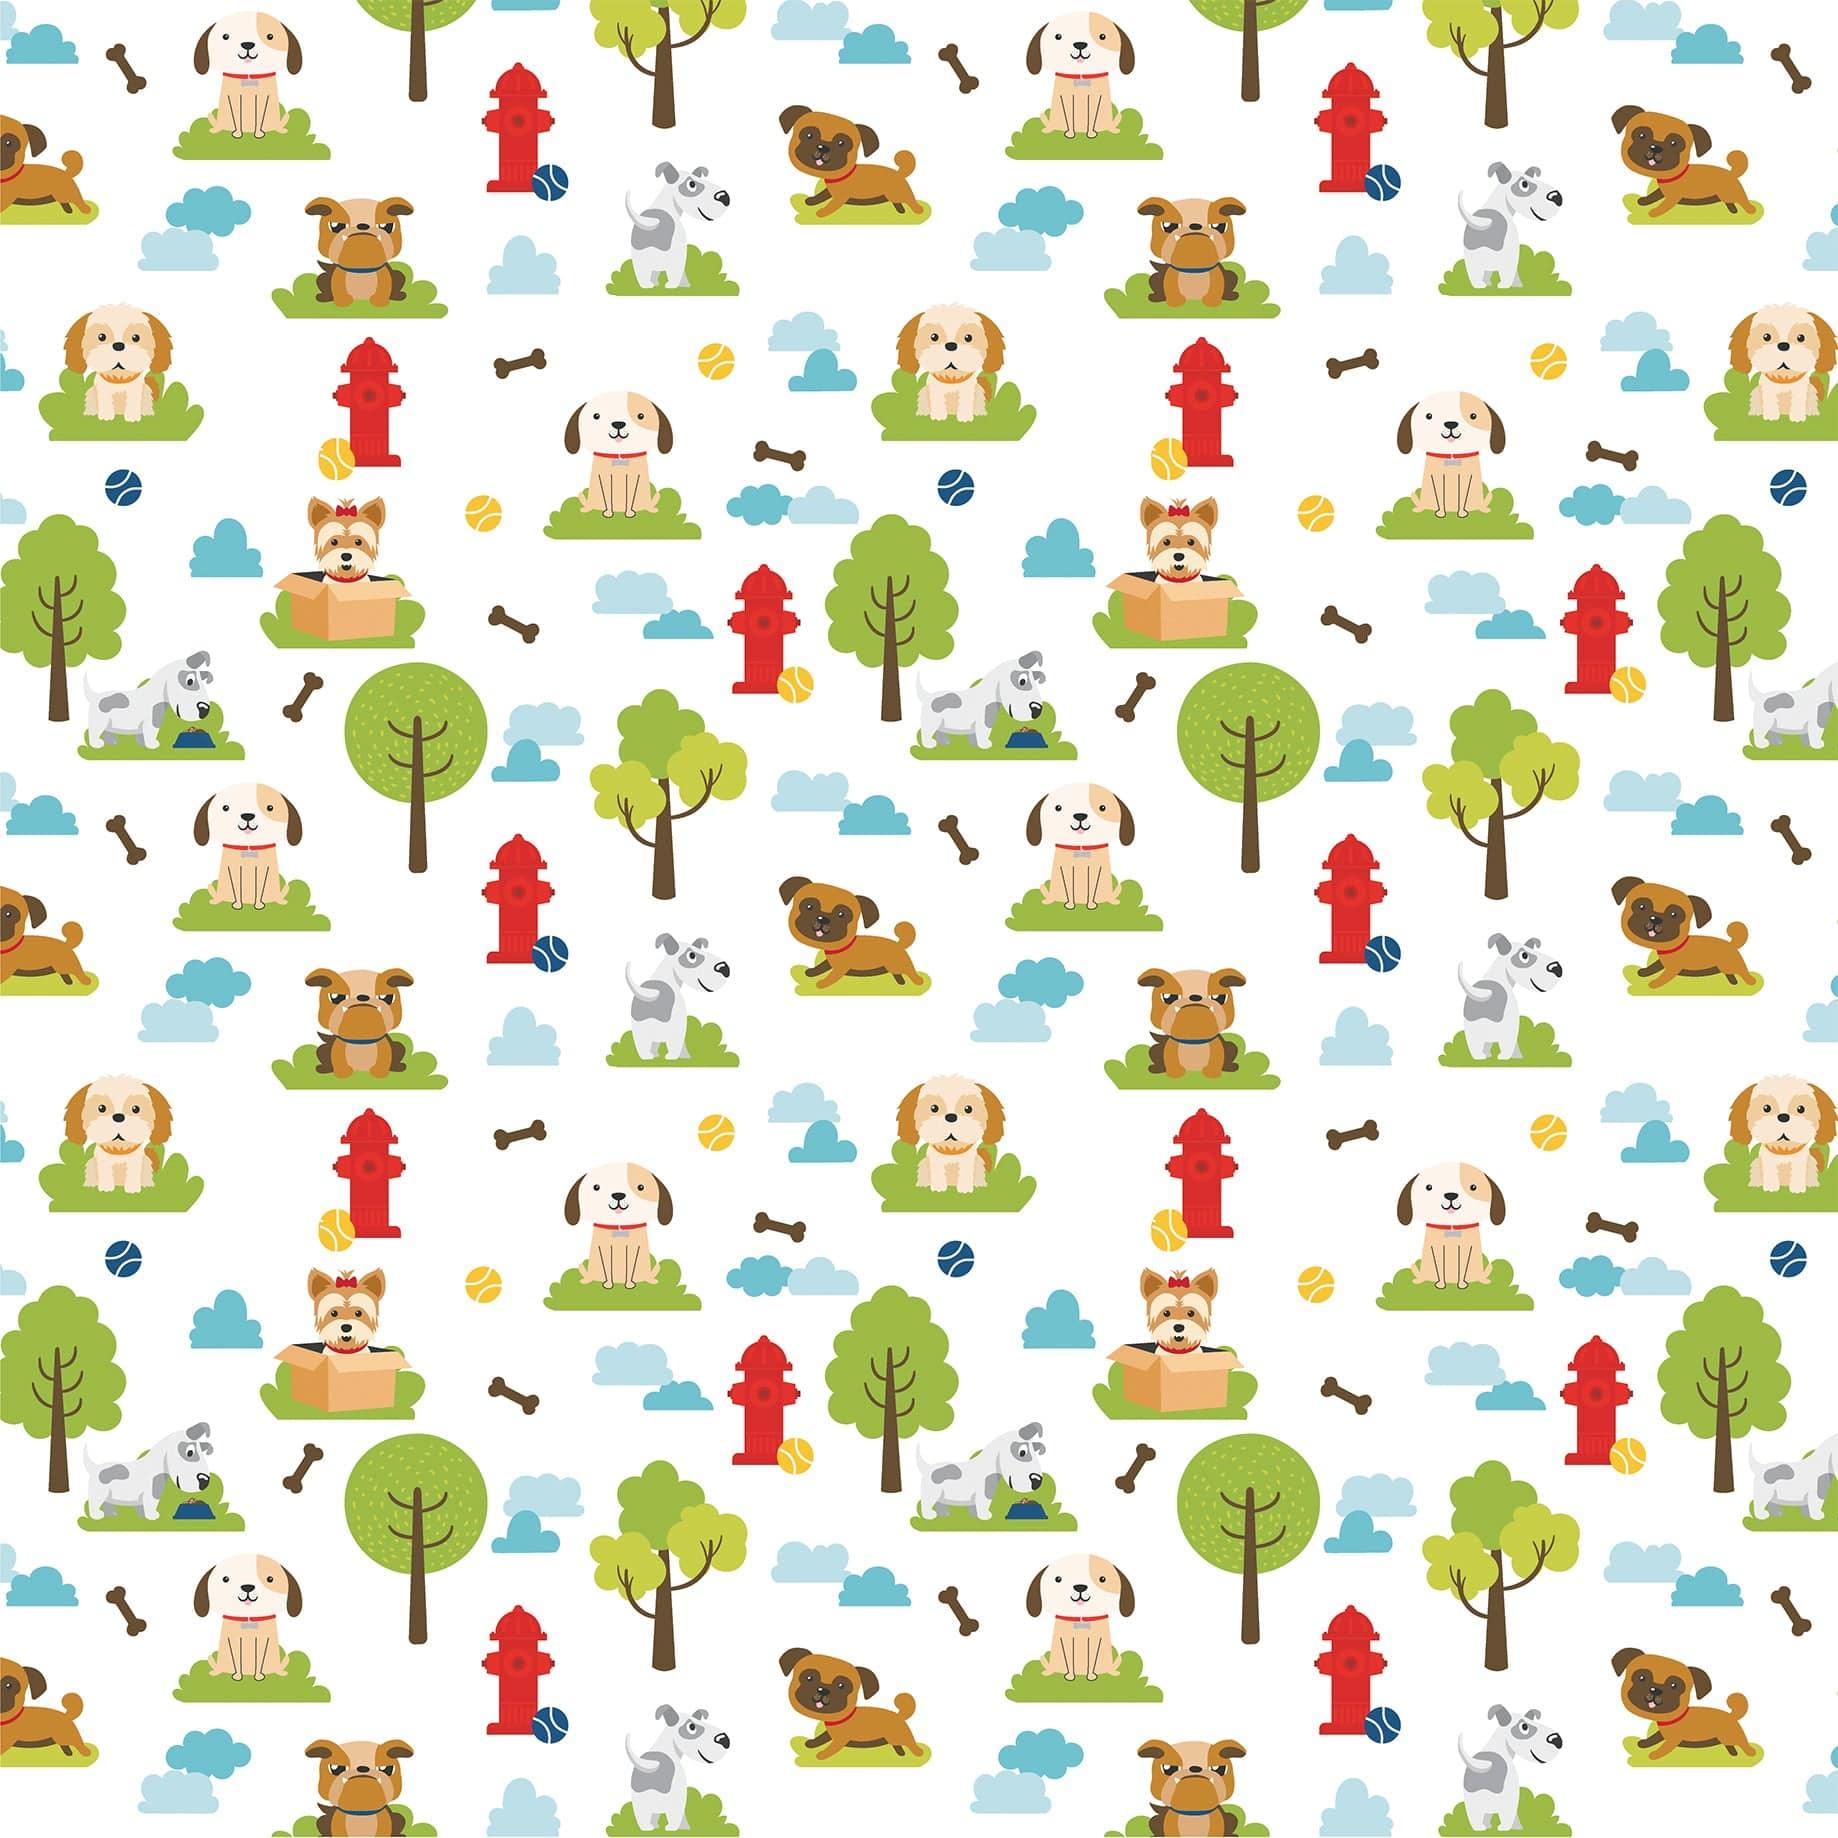 Pets Collection Park Playdate 12 x 12 Double-Sided Scrapbook Paper by Echo Park Paper - Scrapbook Supply Companies